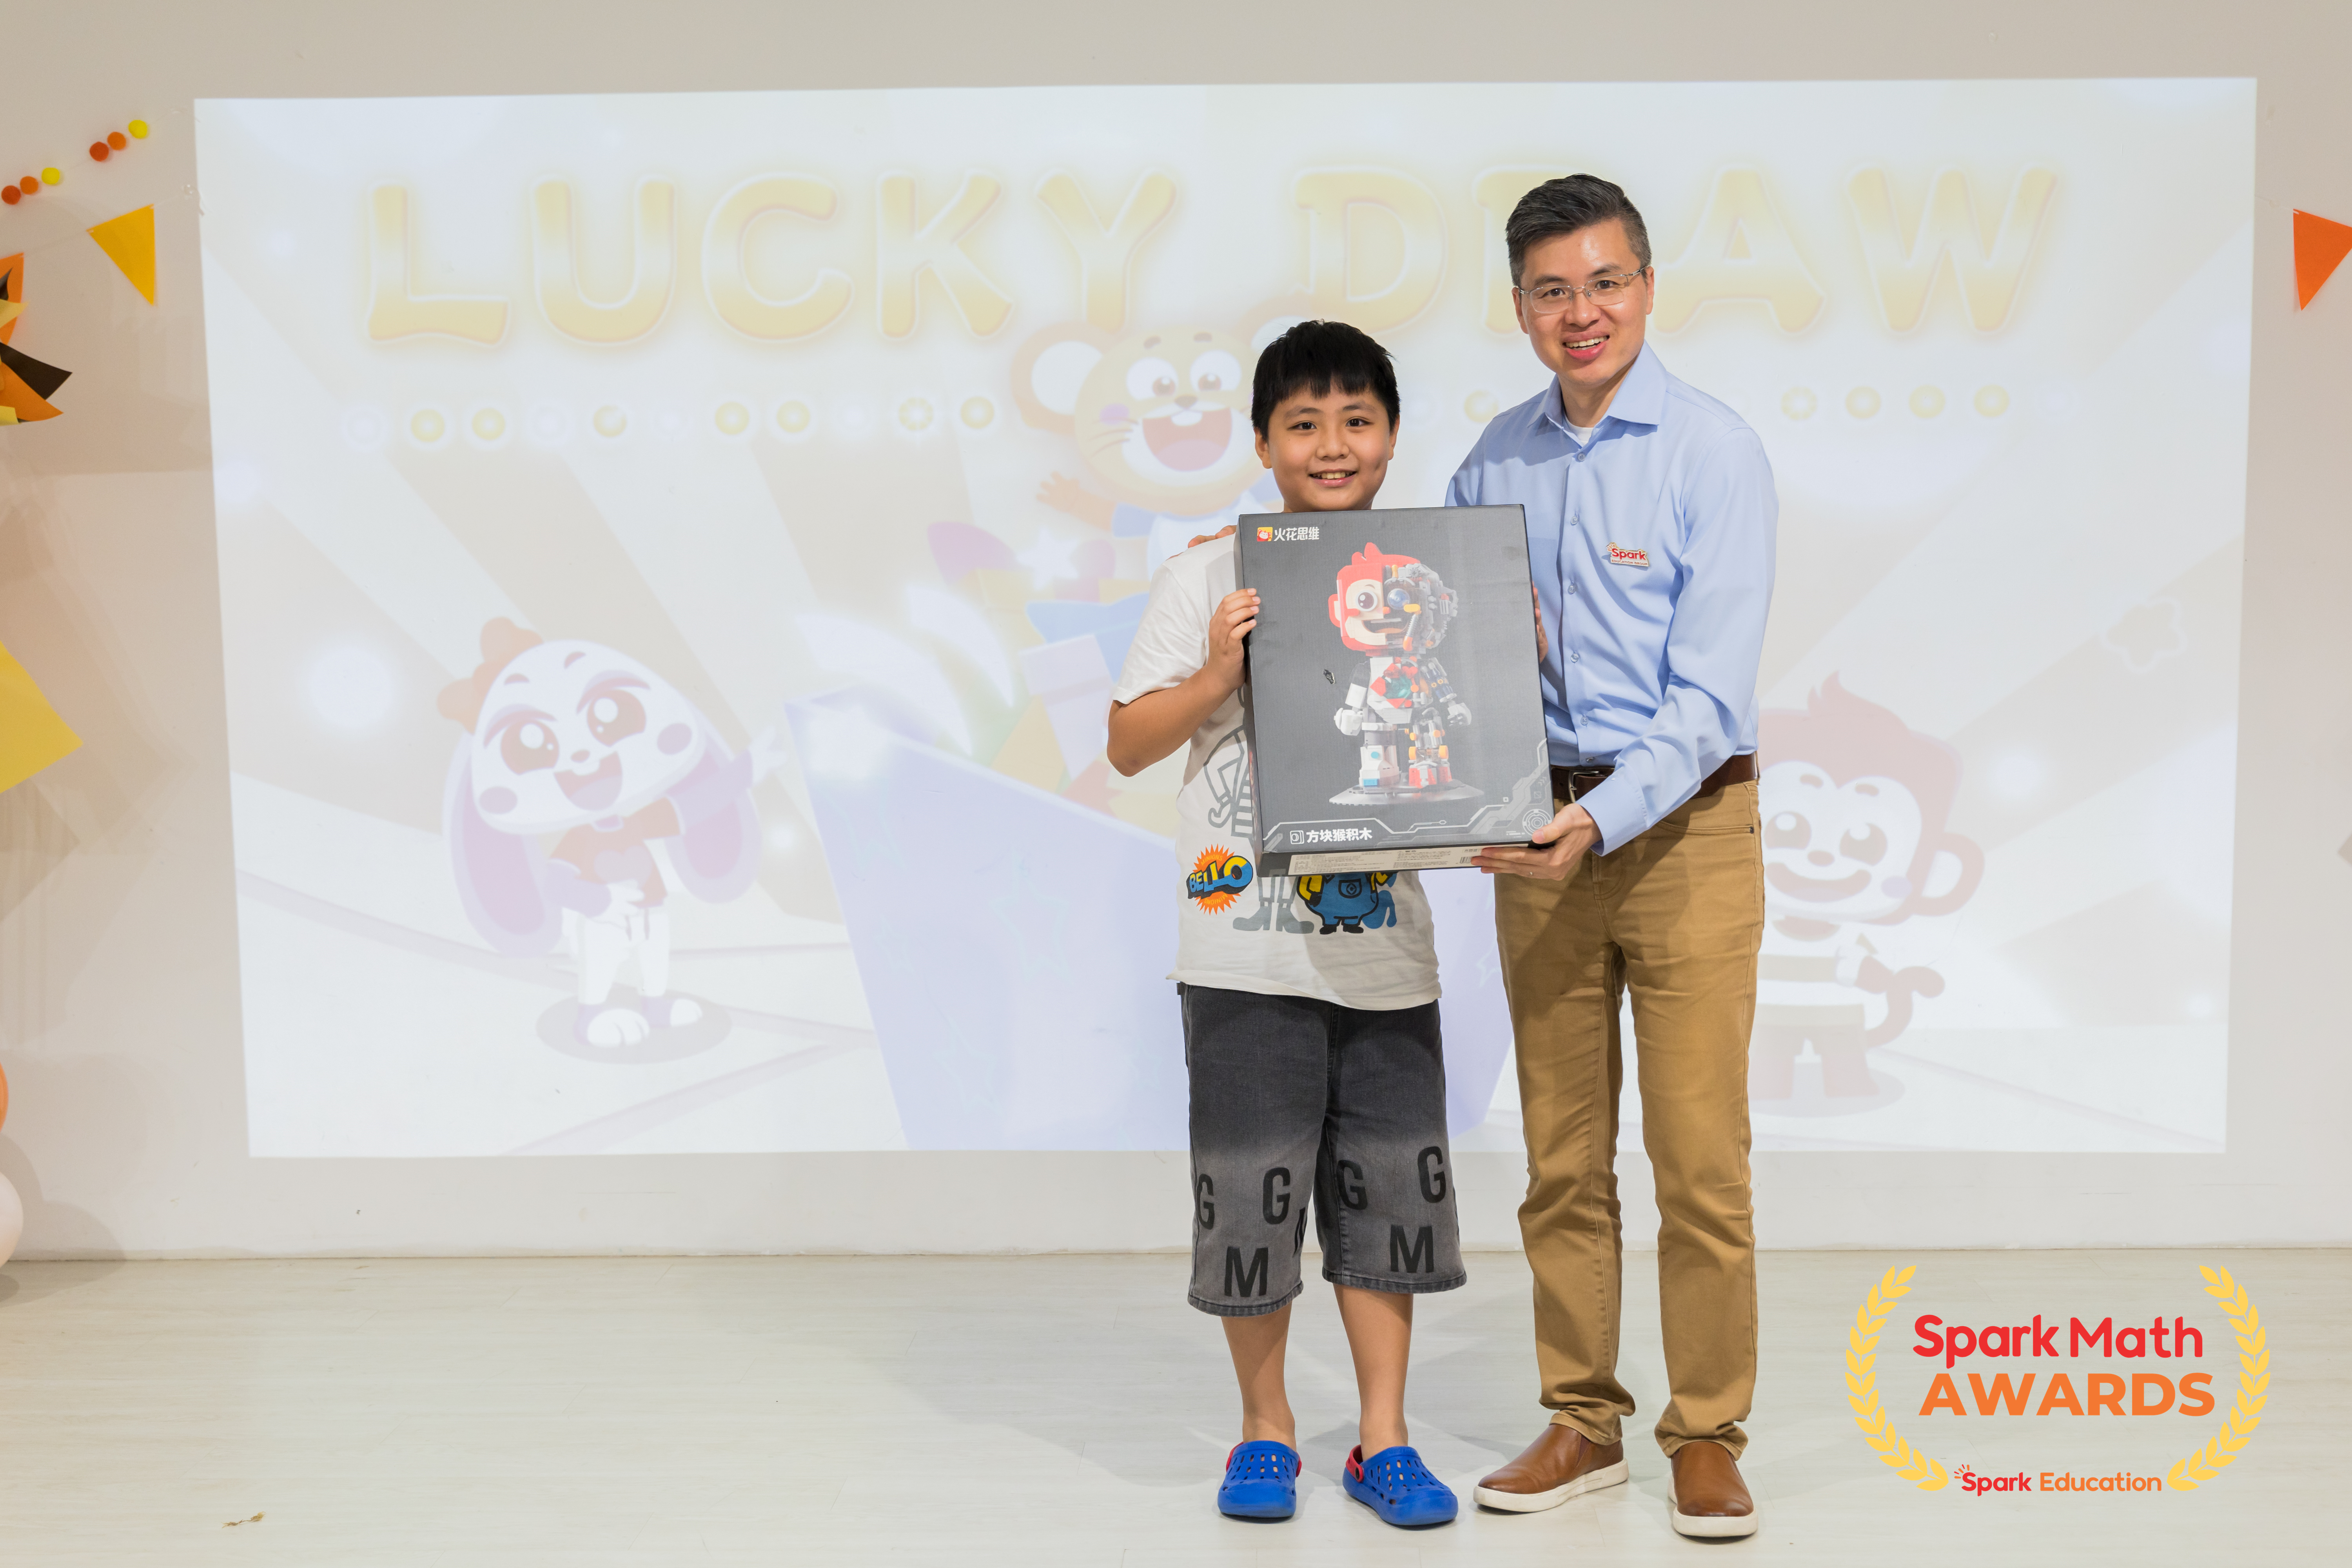 Mr Xiaonan Wang, Co-founder of Spark Education, drawing the lucky winner for our limited-edition Benny lego set.